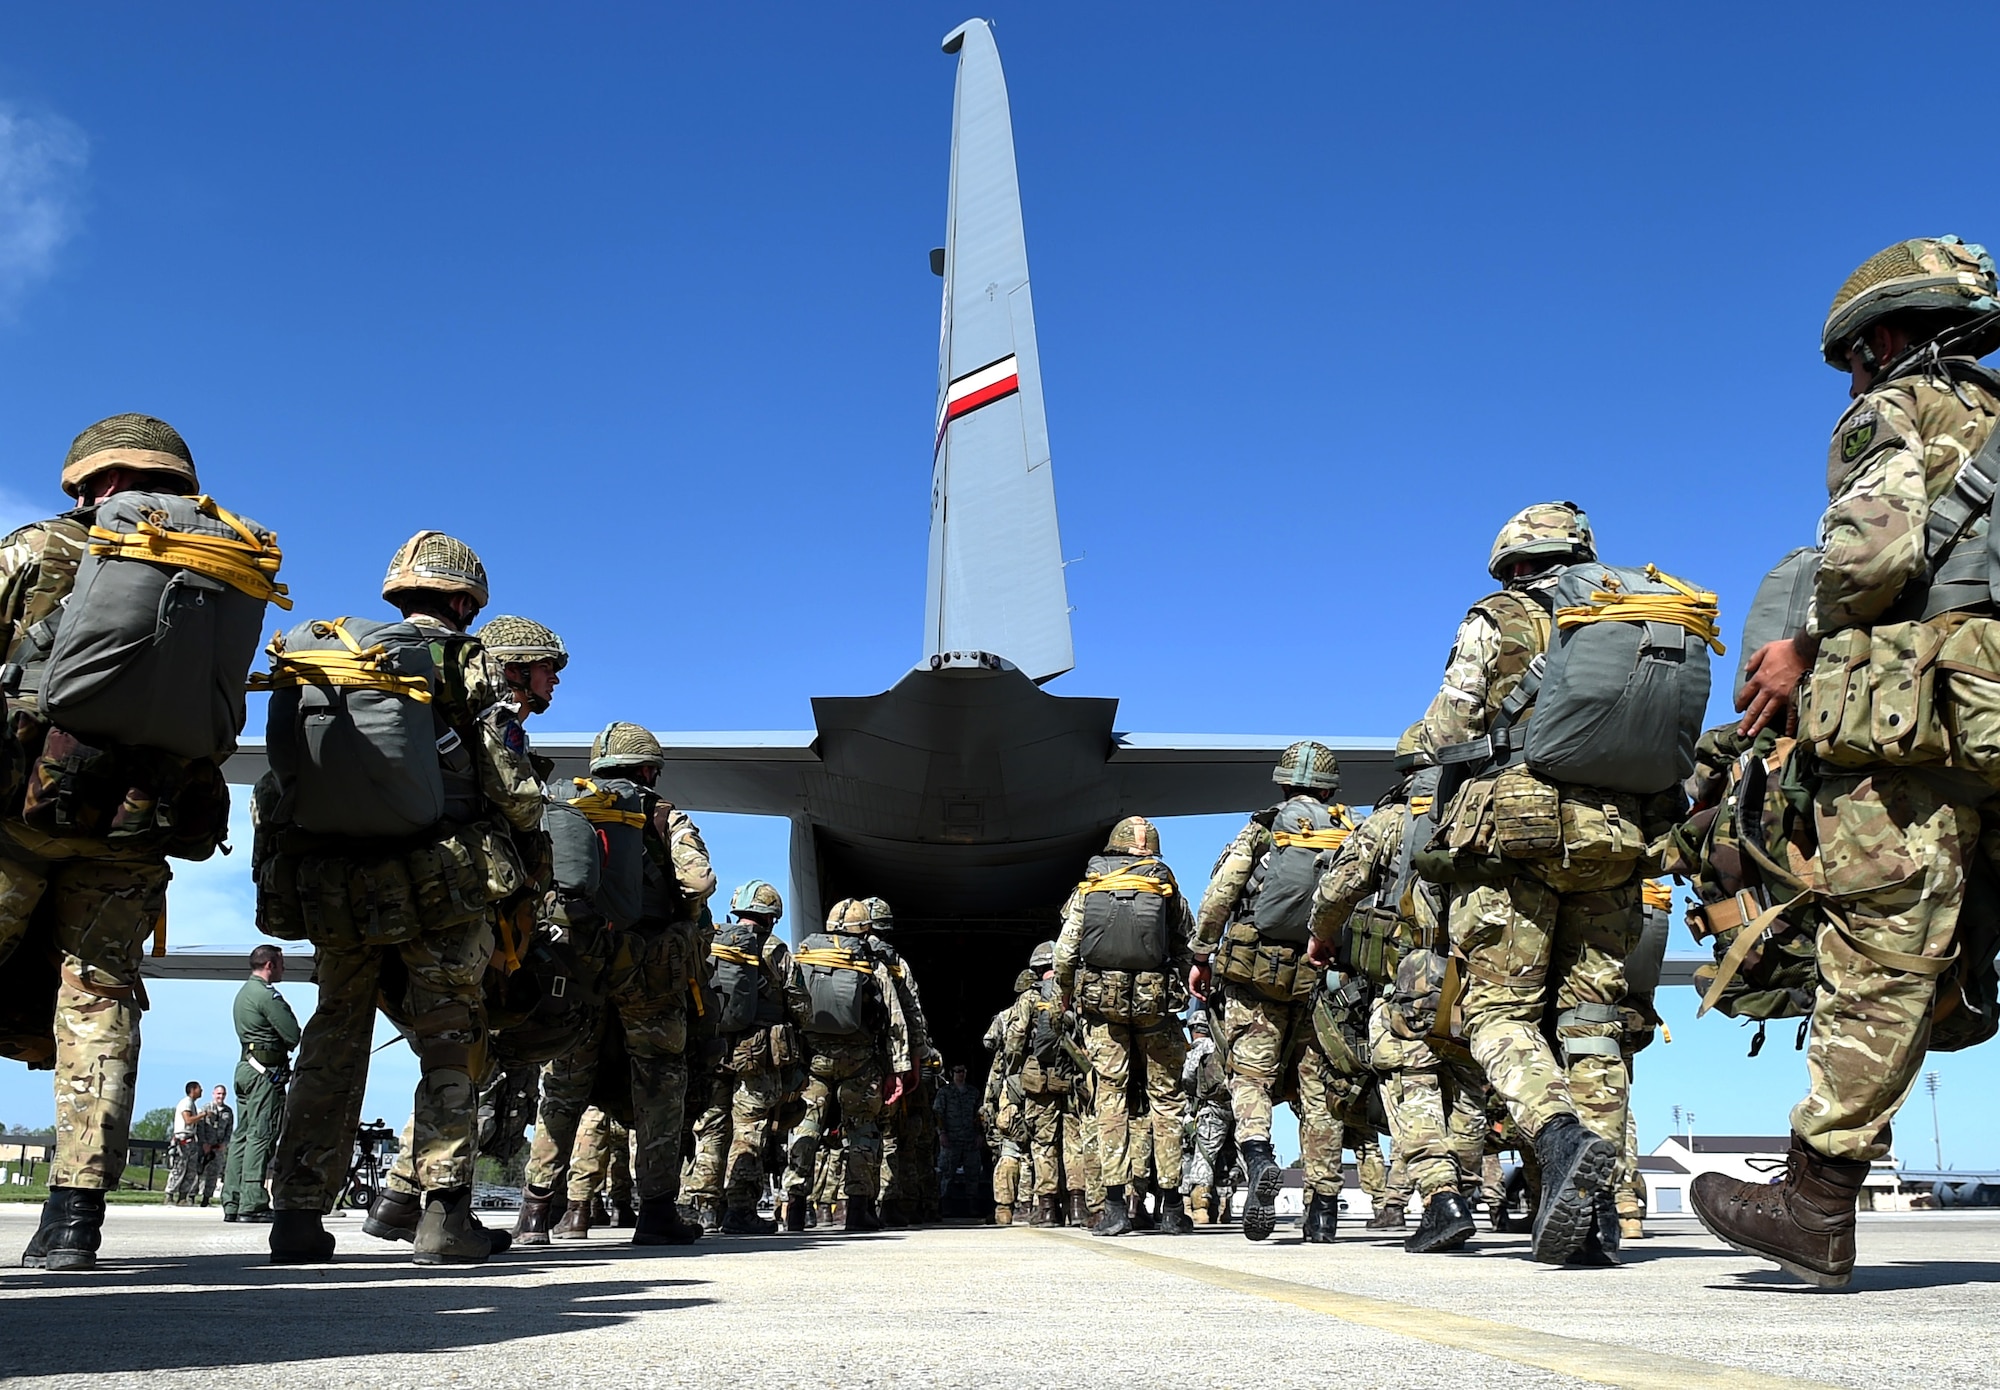 British Army parajumpers from the 16th Air Assault Brigade load onto a C-130J Super Hercules assigned to the 317th Airlift Group, Dyess Air Force Base, Texas, April 11, 2015, at Pope Army Airfield, N.C. During Combined Joint Operational Access Exercise 15-01, U.S. Air Force and Army personnel worked together with Royal Air Force and British Army personnel. Several days of training culminated with more than 2,100 parajumpers and hundreds of pounds of equipment being dropped during a Joint Forcible Entry Exercise. (U.S. Air Force photo/Senior Airman Peter Thompson)